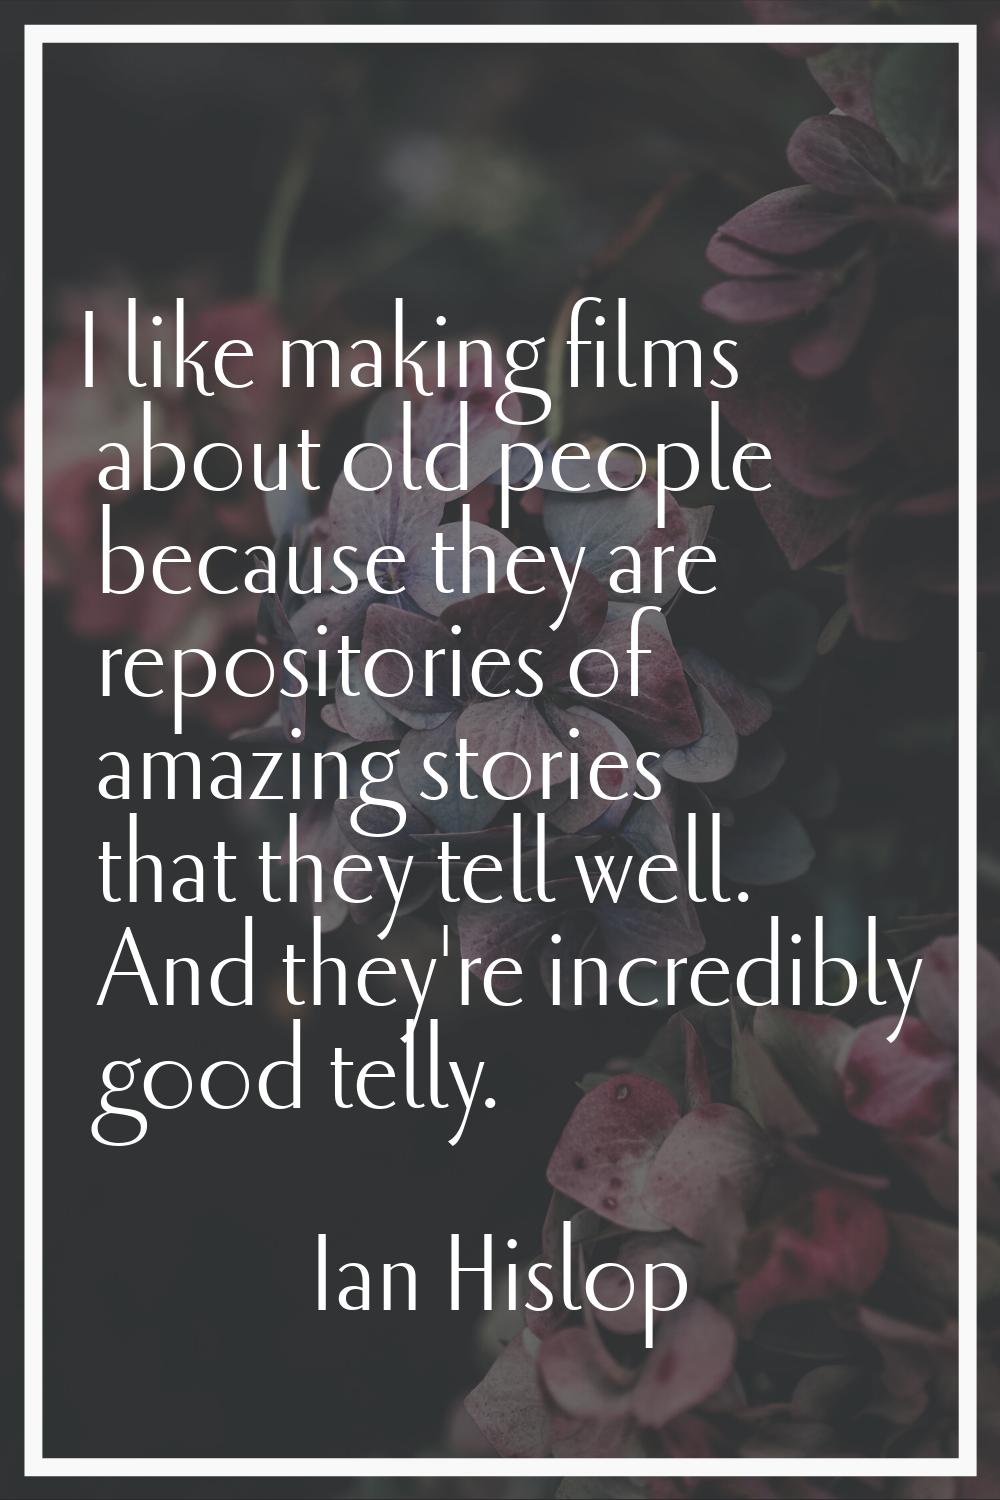 I like making films about old people because they are repositories of amazing stories that they tel